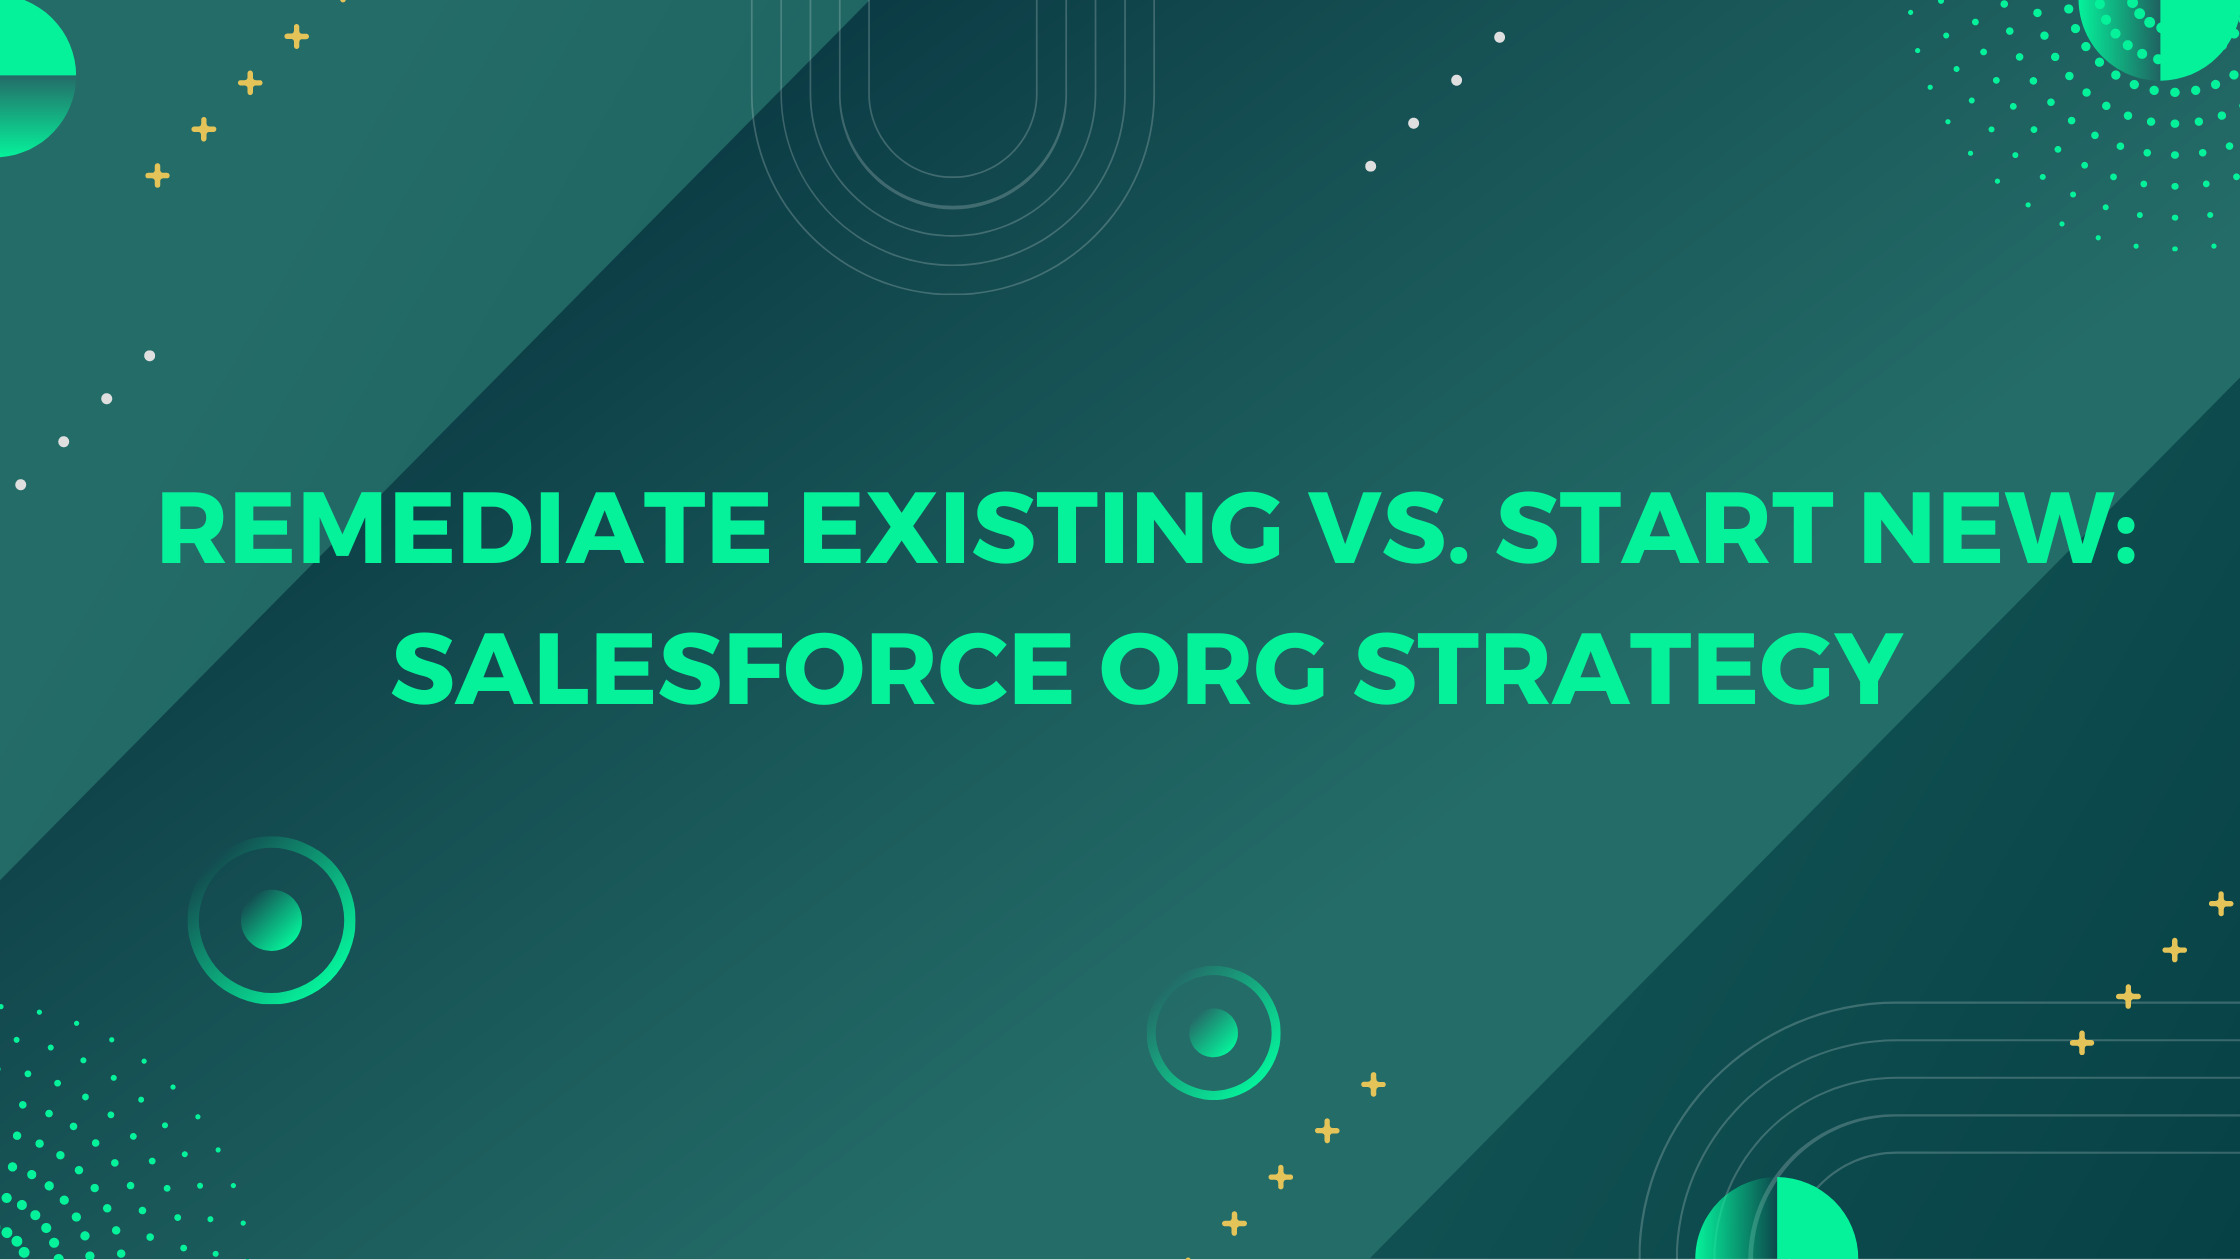 Remediate Existing vs. Start New Salesforce Org Strategy